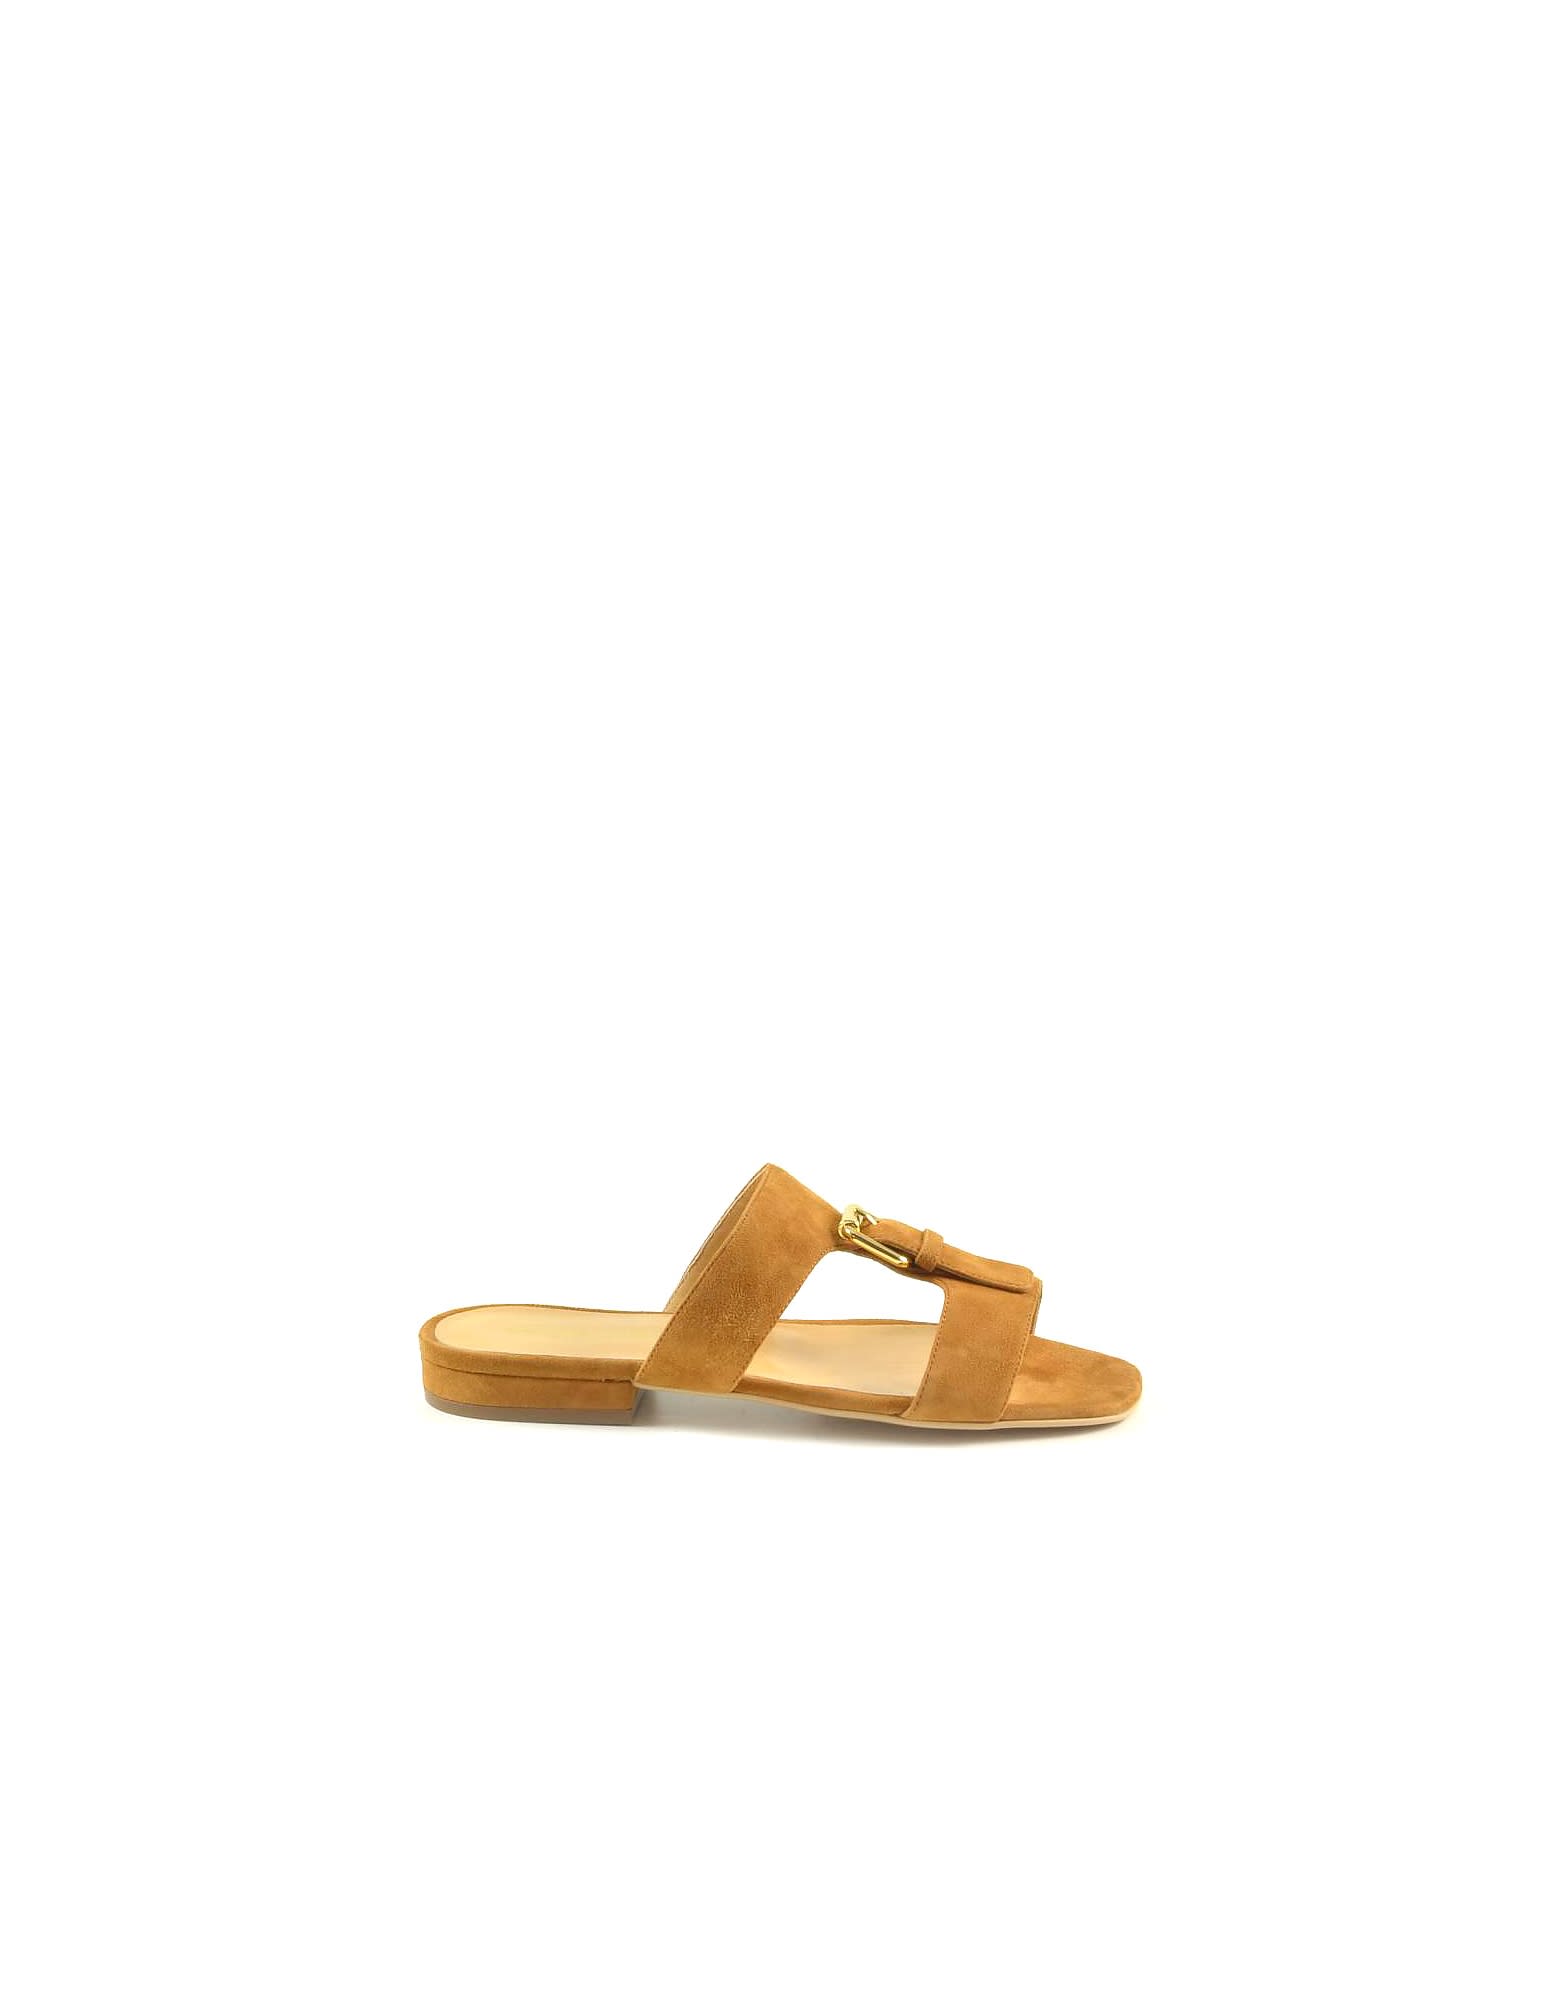 Buy Sergio Rossi Camel Suede Slide Flat Sandals online, shop Sergio Rossi shoes with free shipping